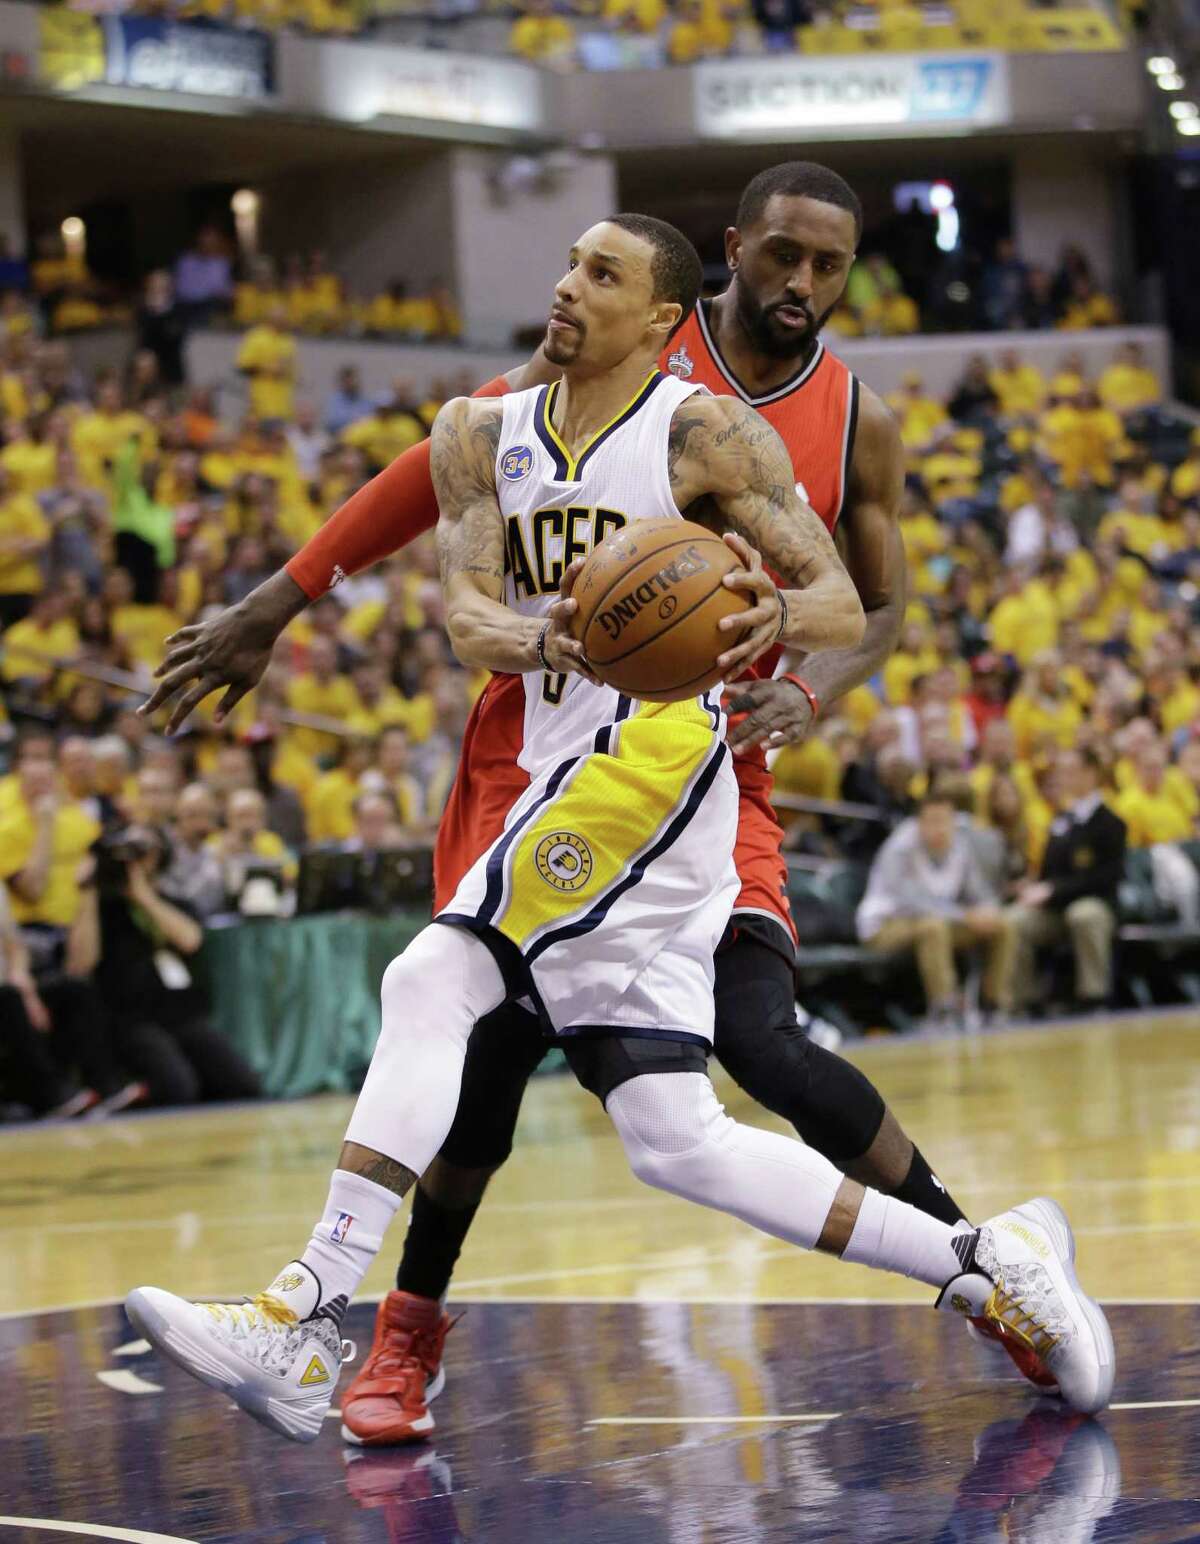 Indiana Pacers' George Hill (3) goes to the basket against Toronto Raptors' Patrick Patterson (54) during the second half of Game 6 of an NBA first-round playoff basketball series Friday, April 29, 2016, in Indianapolis. Indiana won 101-83. (AP Photo/Darron Cummings)